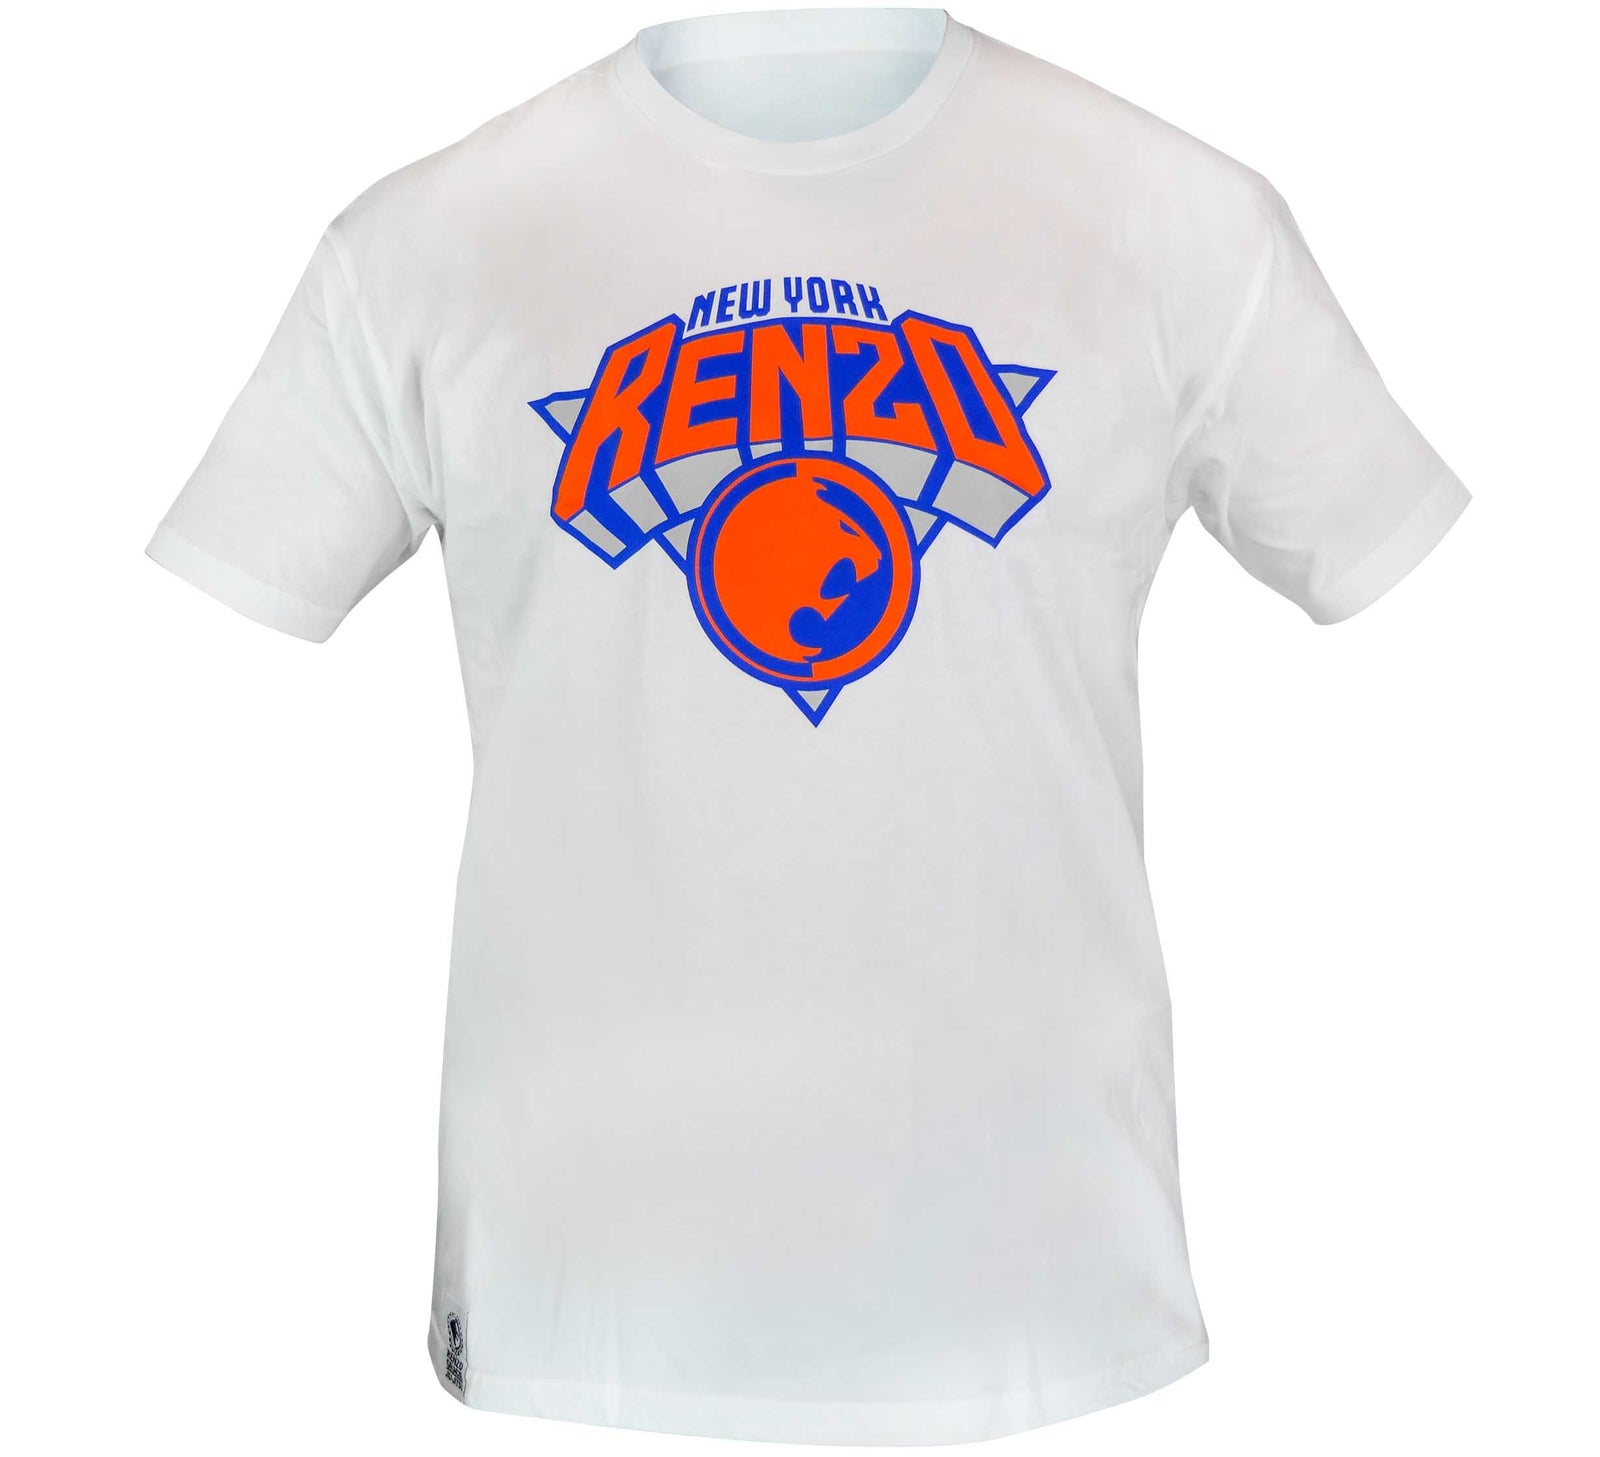 New York Knicks White Short on sale,for Cheap,wholesale from China